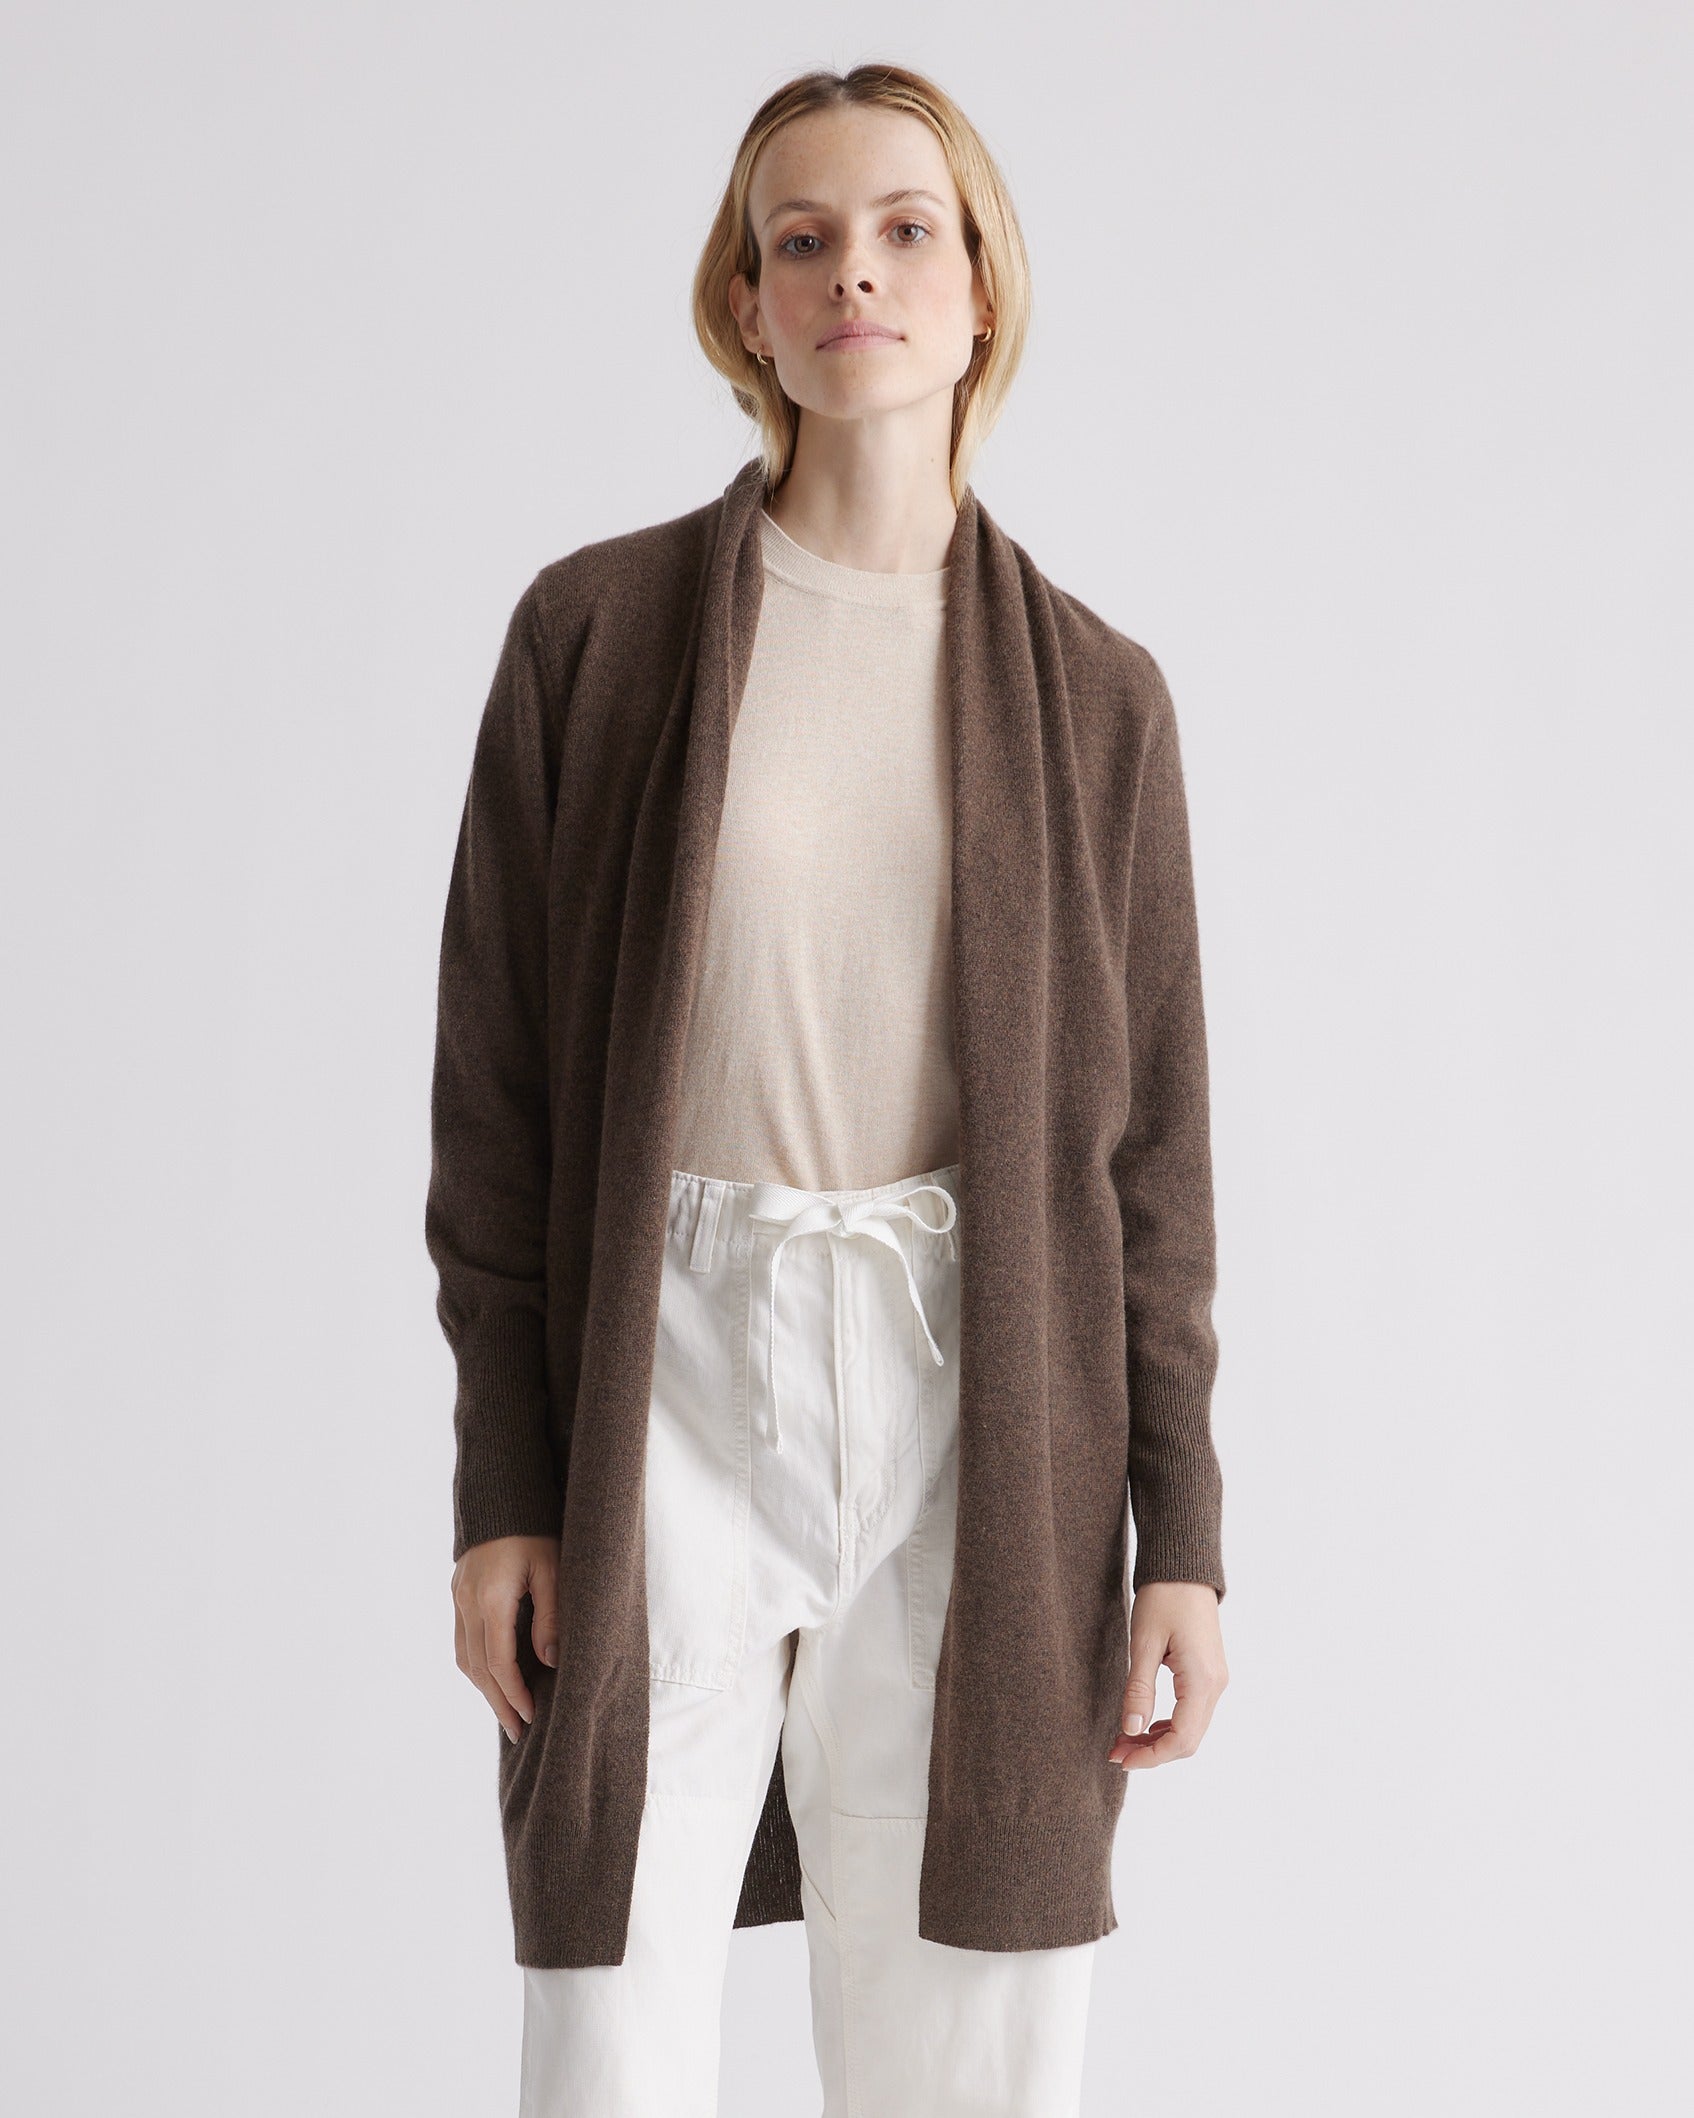 Quince + Mongolian Cashmere Duster Cardigan Sweater